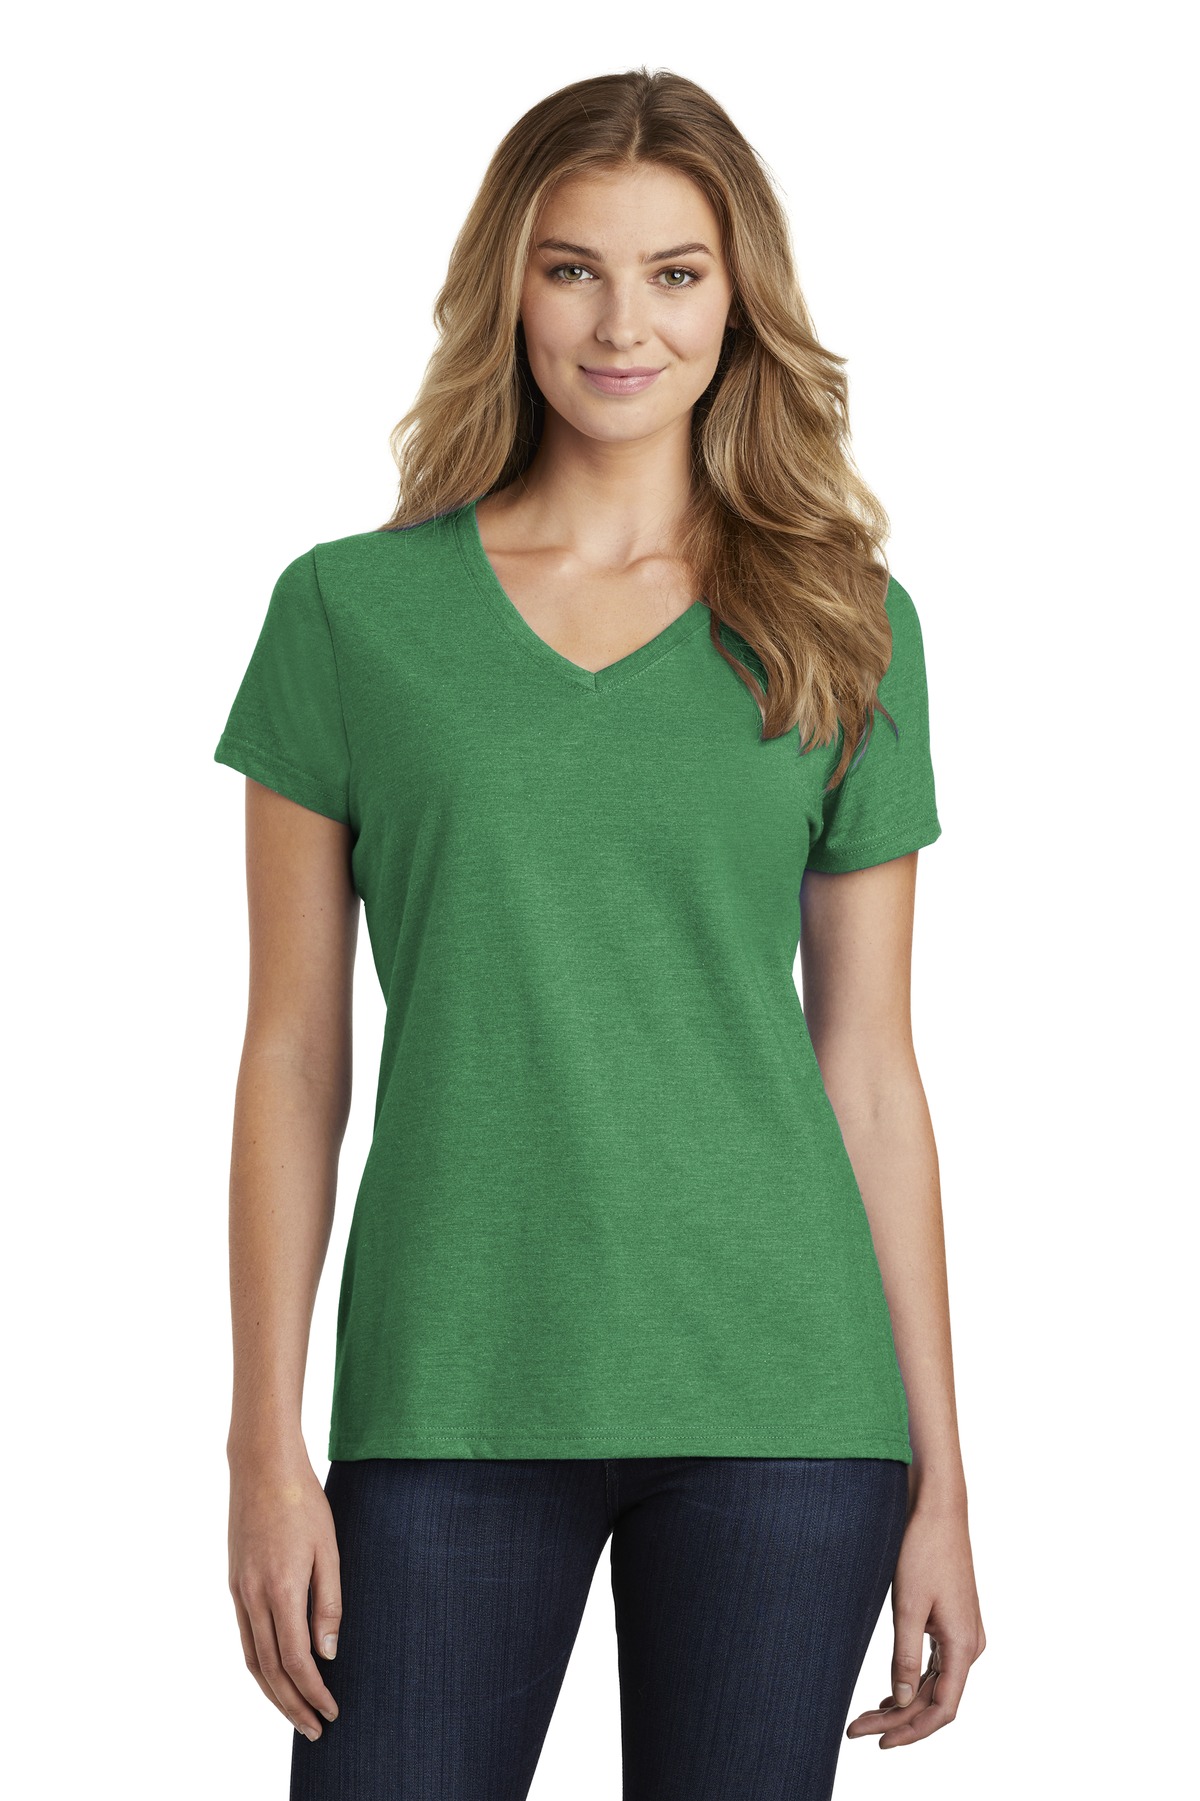 Athletic Kelly Green Heather